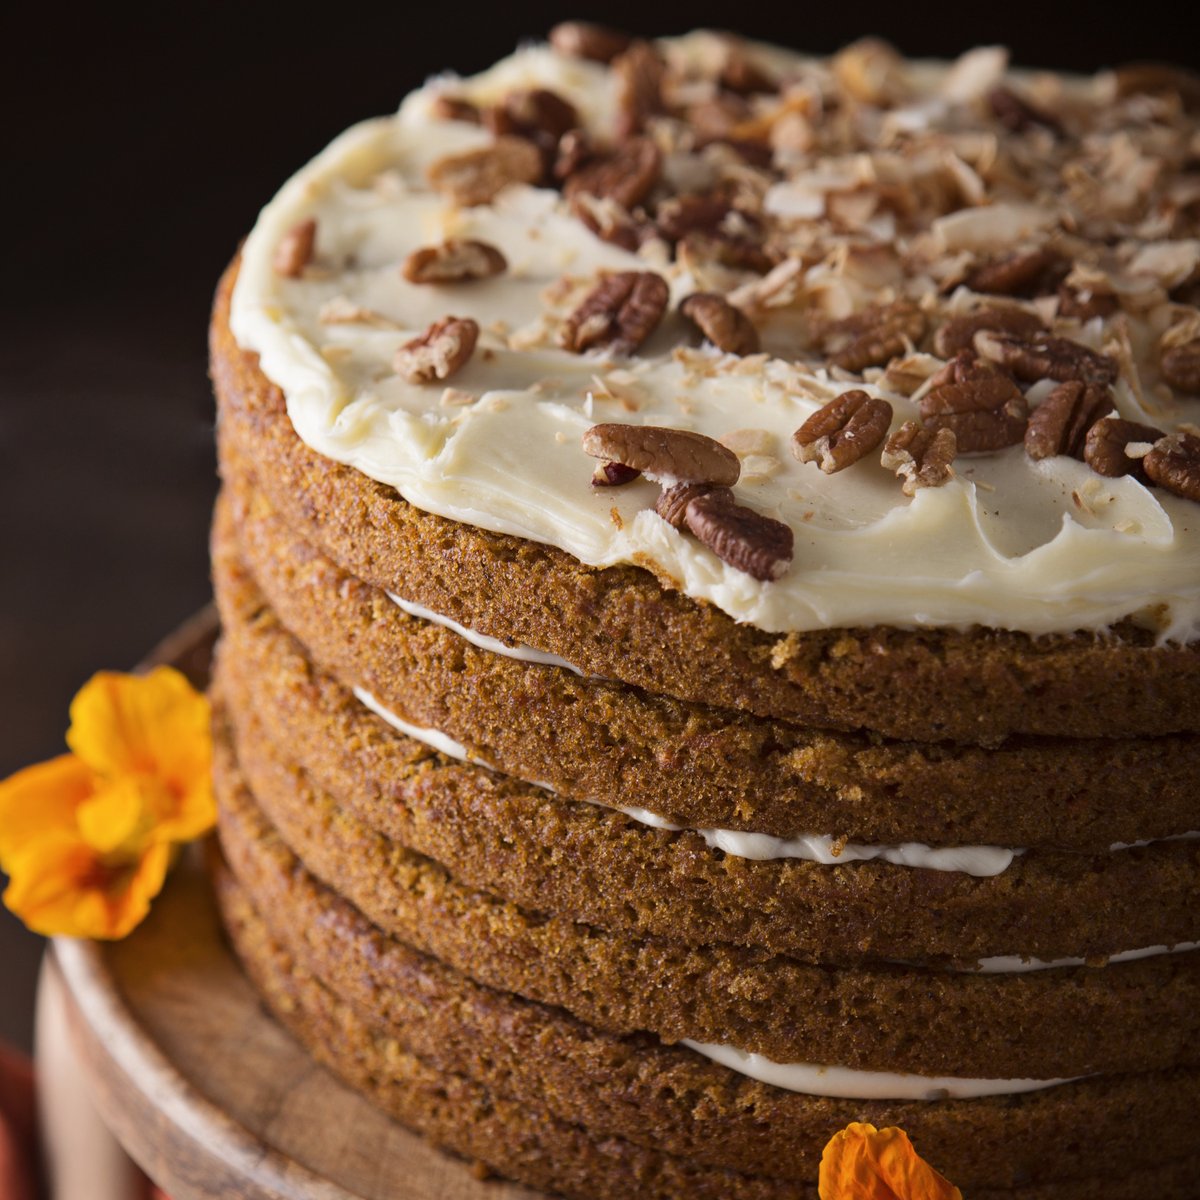 Hop into the weekend with a slice of our delicious Big Iced Carrot Cake, and savor the perfect blend of fresh toasted coconut, crunchy pecans, and smooth cream cheese frosting! 🐰🥕🍰 . . #sweetstreet #sweetstreetdesserts #carrotcake #carrot #cake